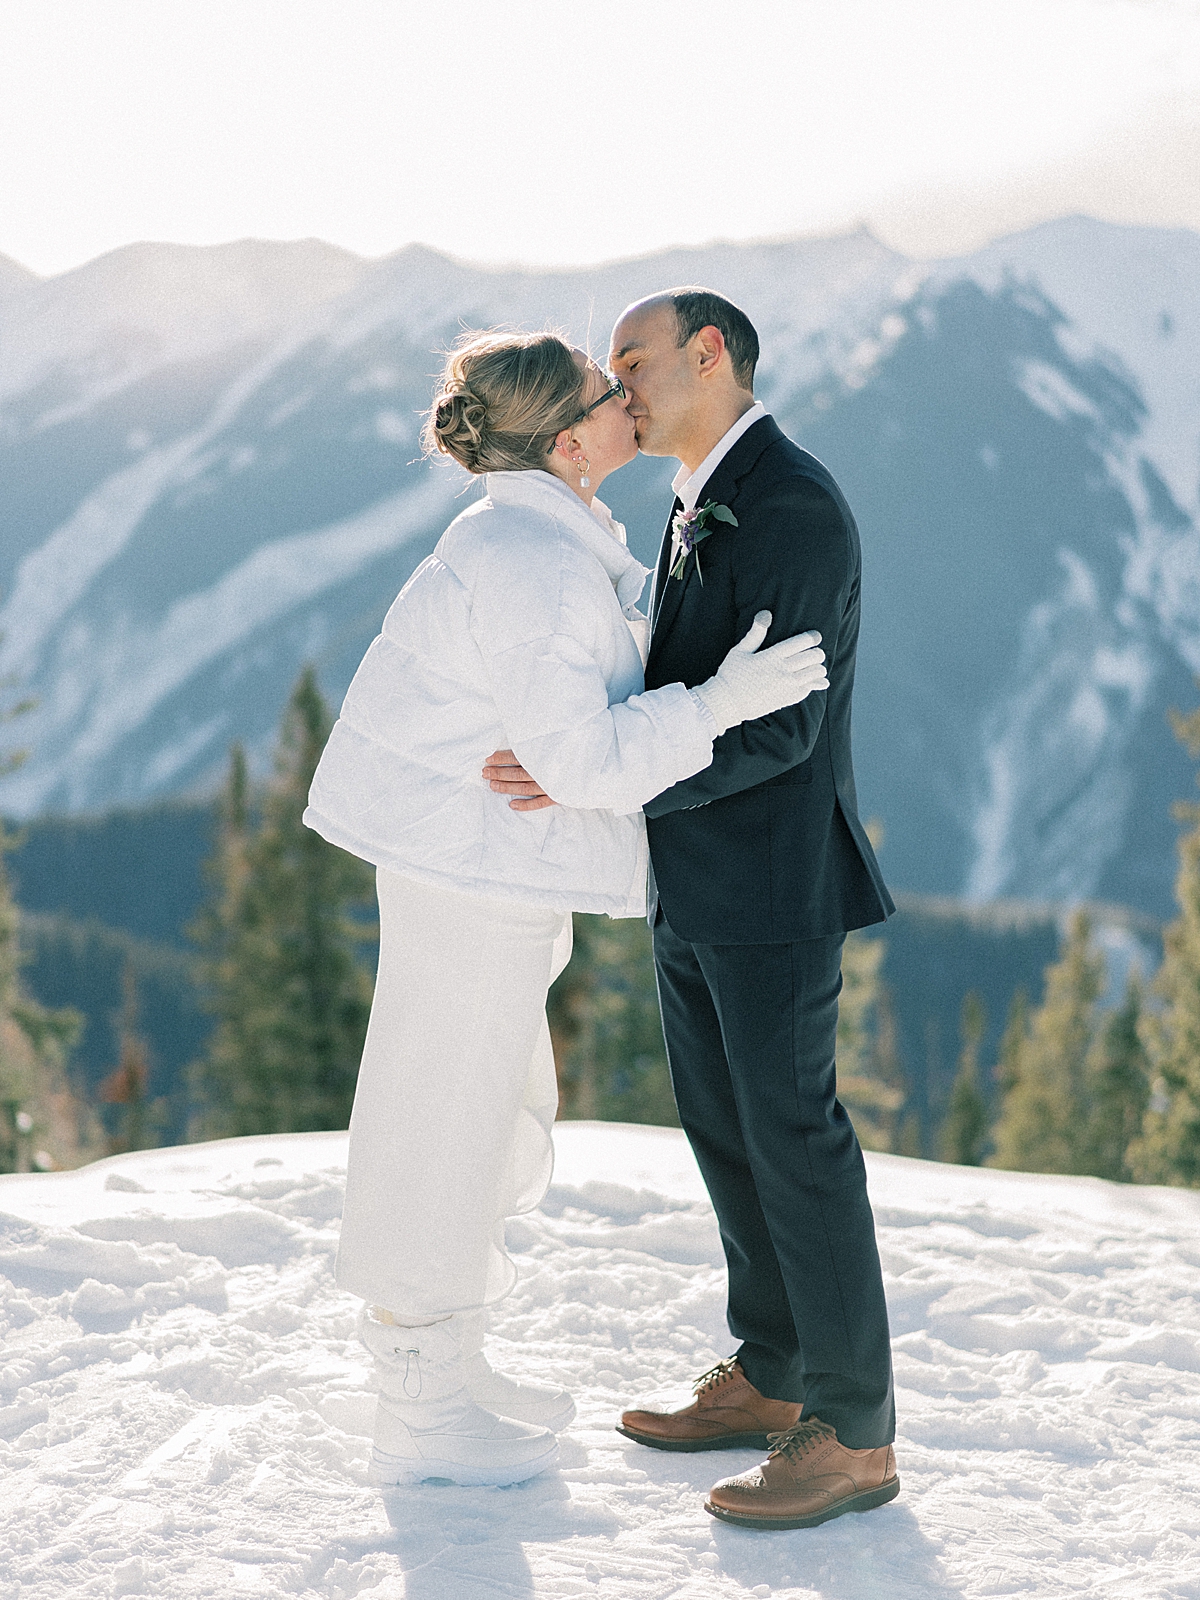 A bride and groom share their firsts kiss after reading vows to each other, on the snowy mountain in Aspen.